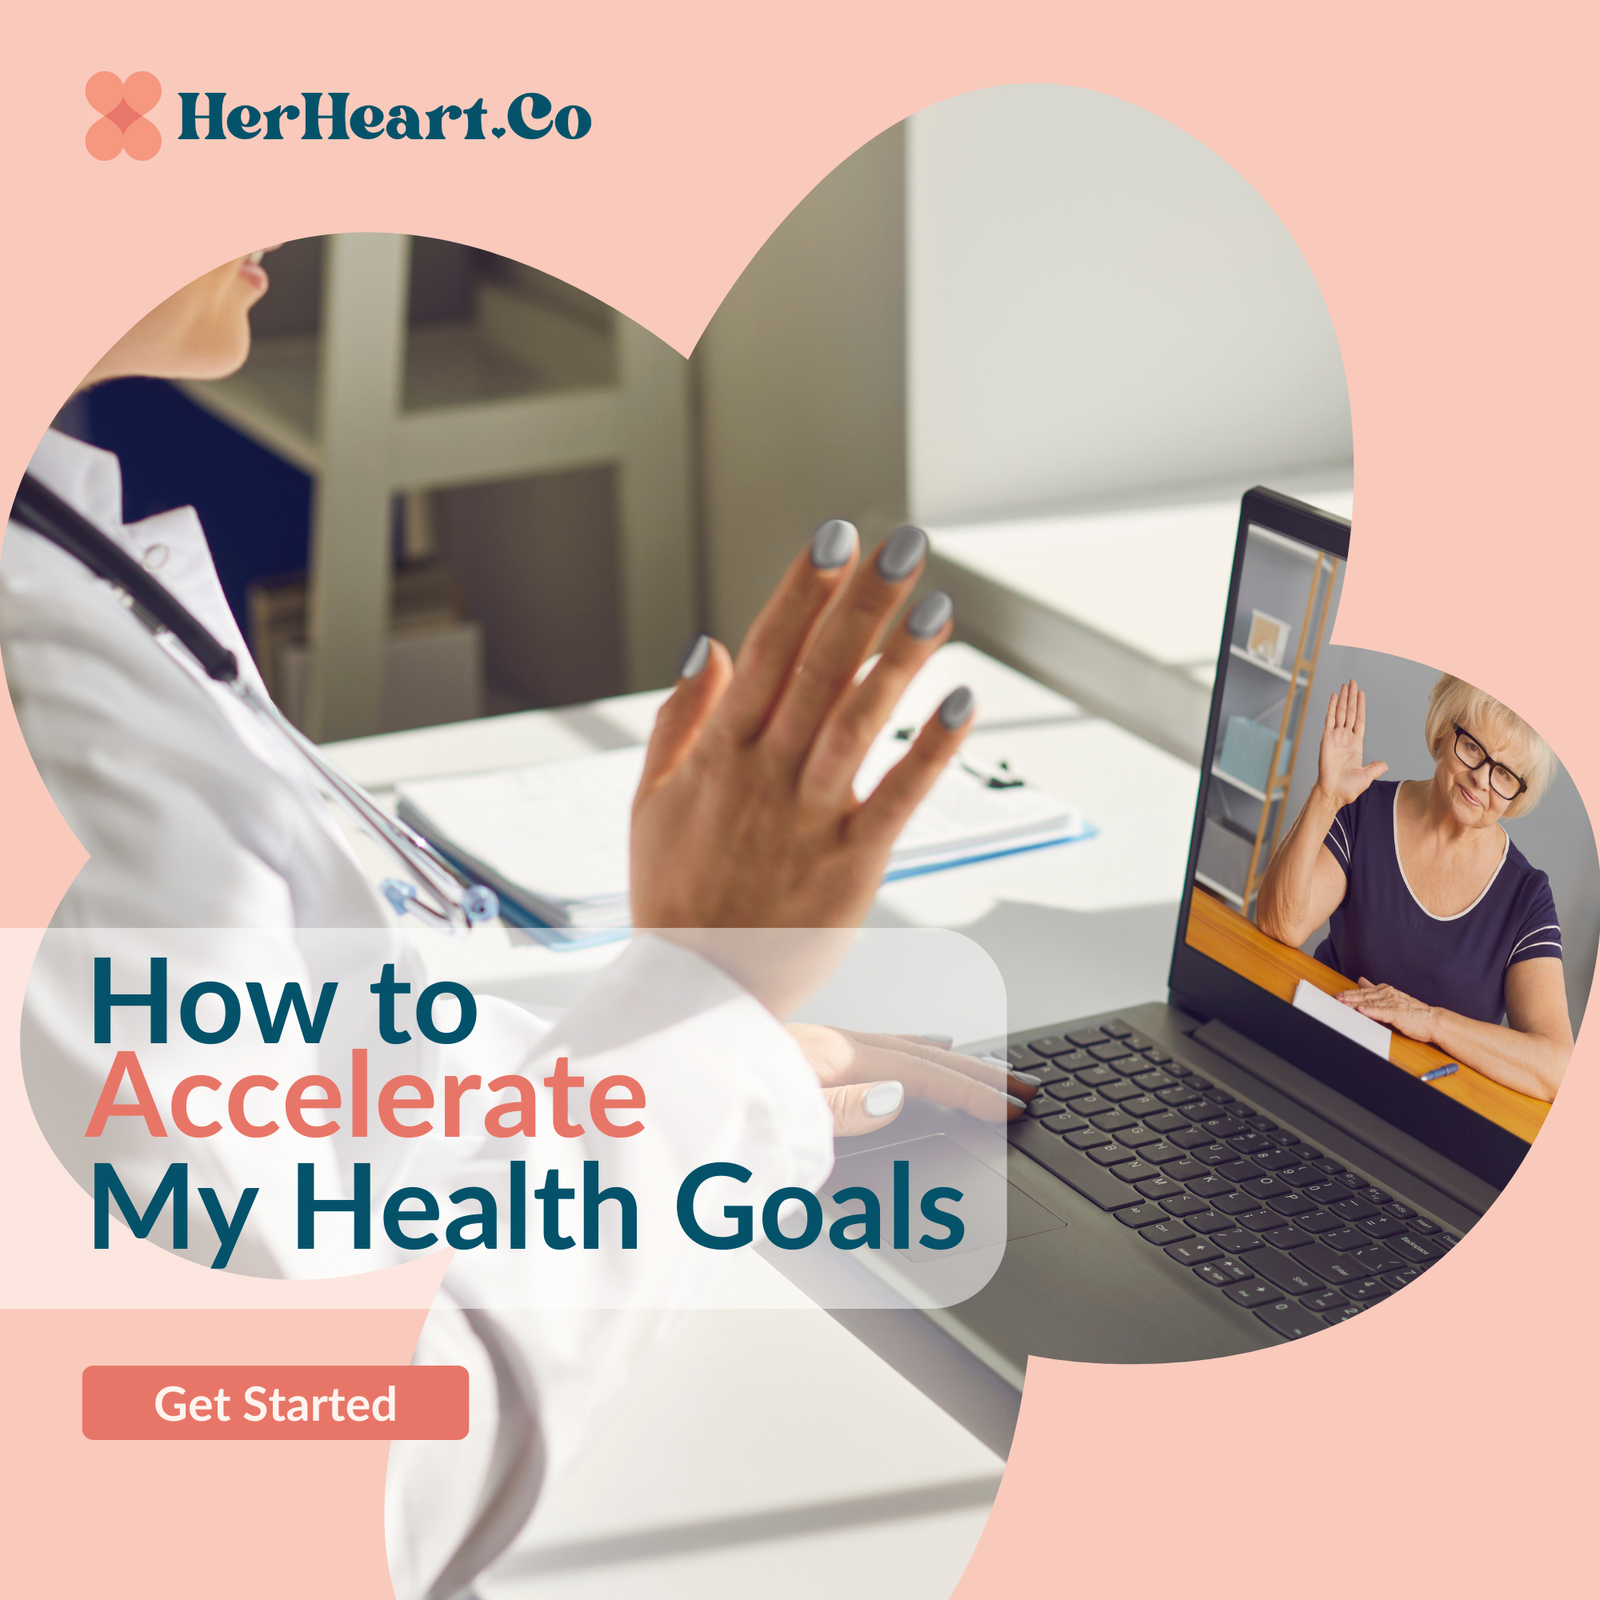 How Can HerHeartCo Accelerate My Health Goals?